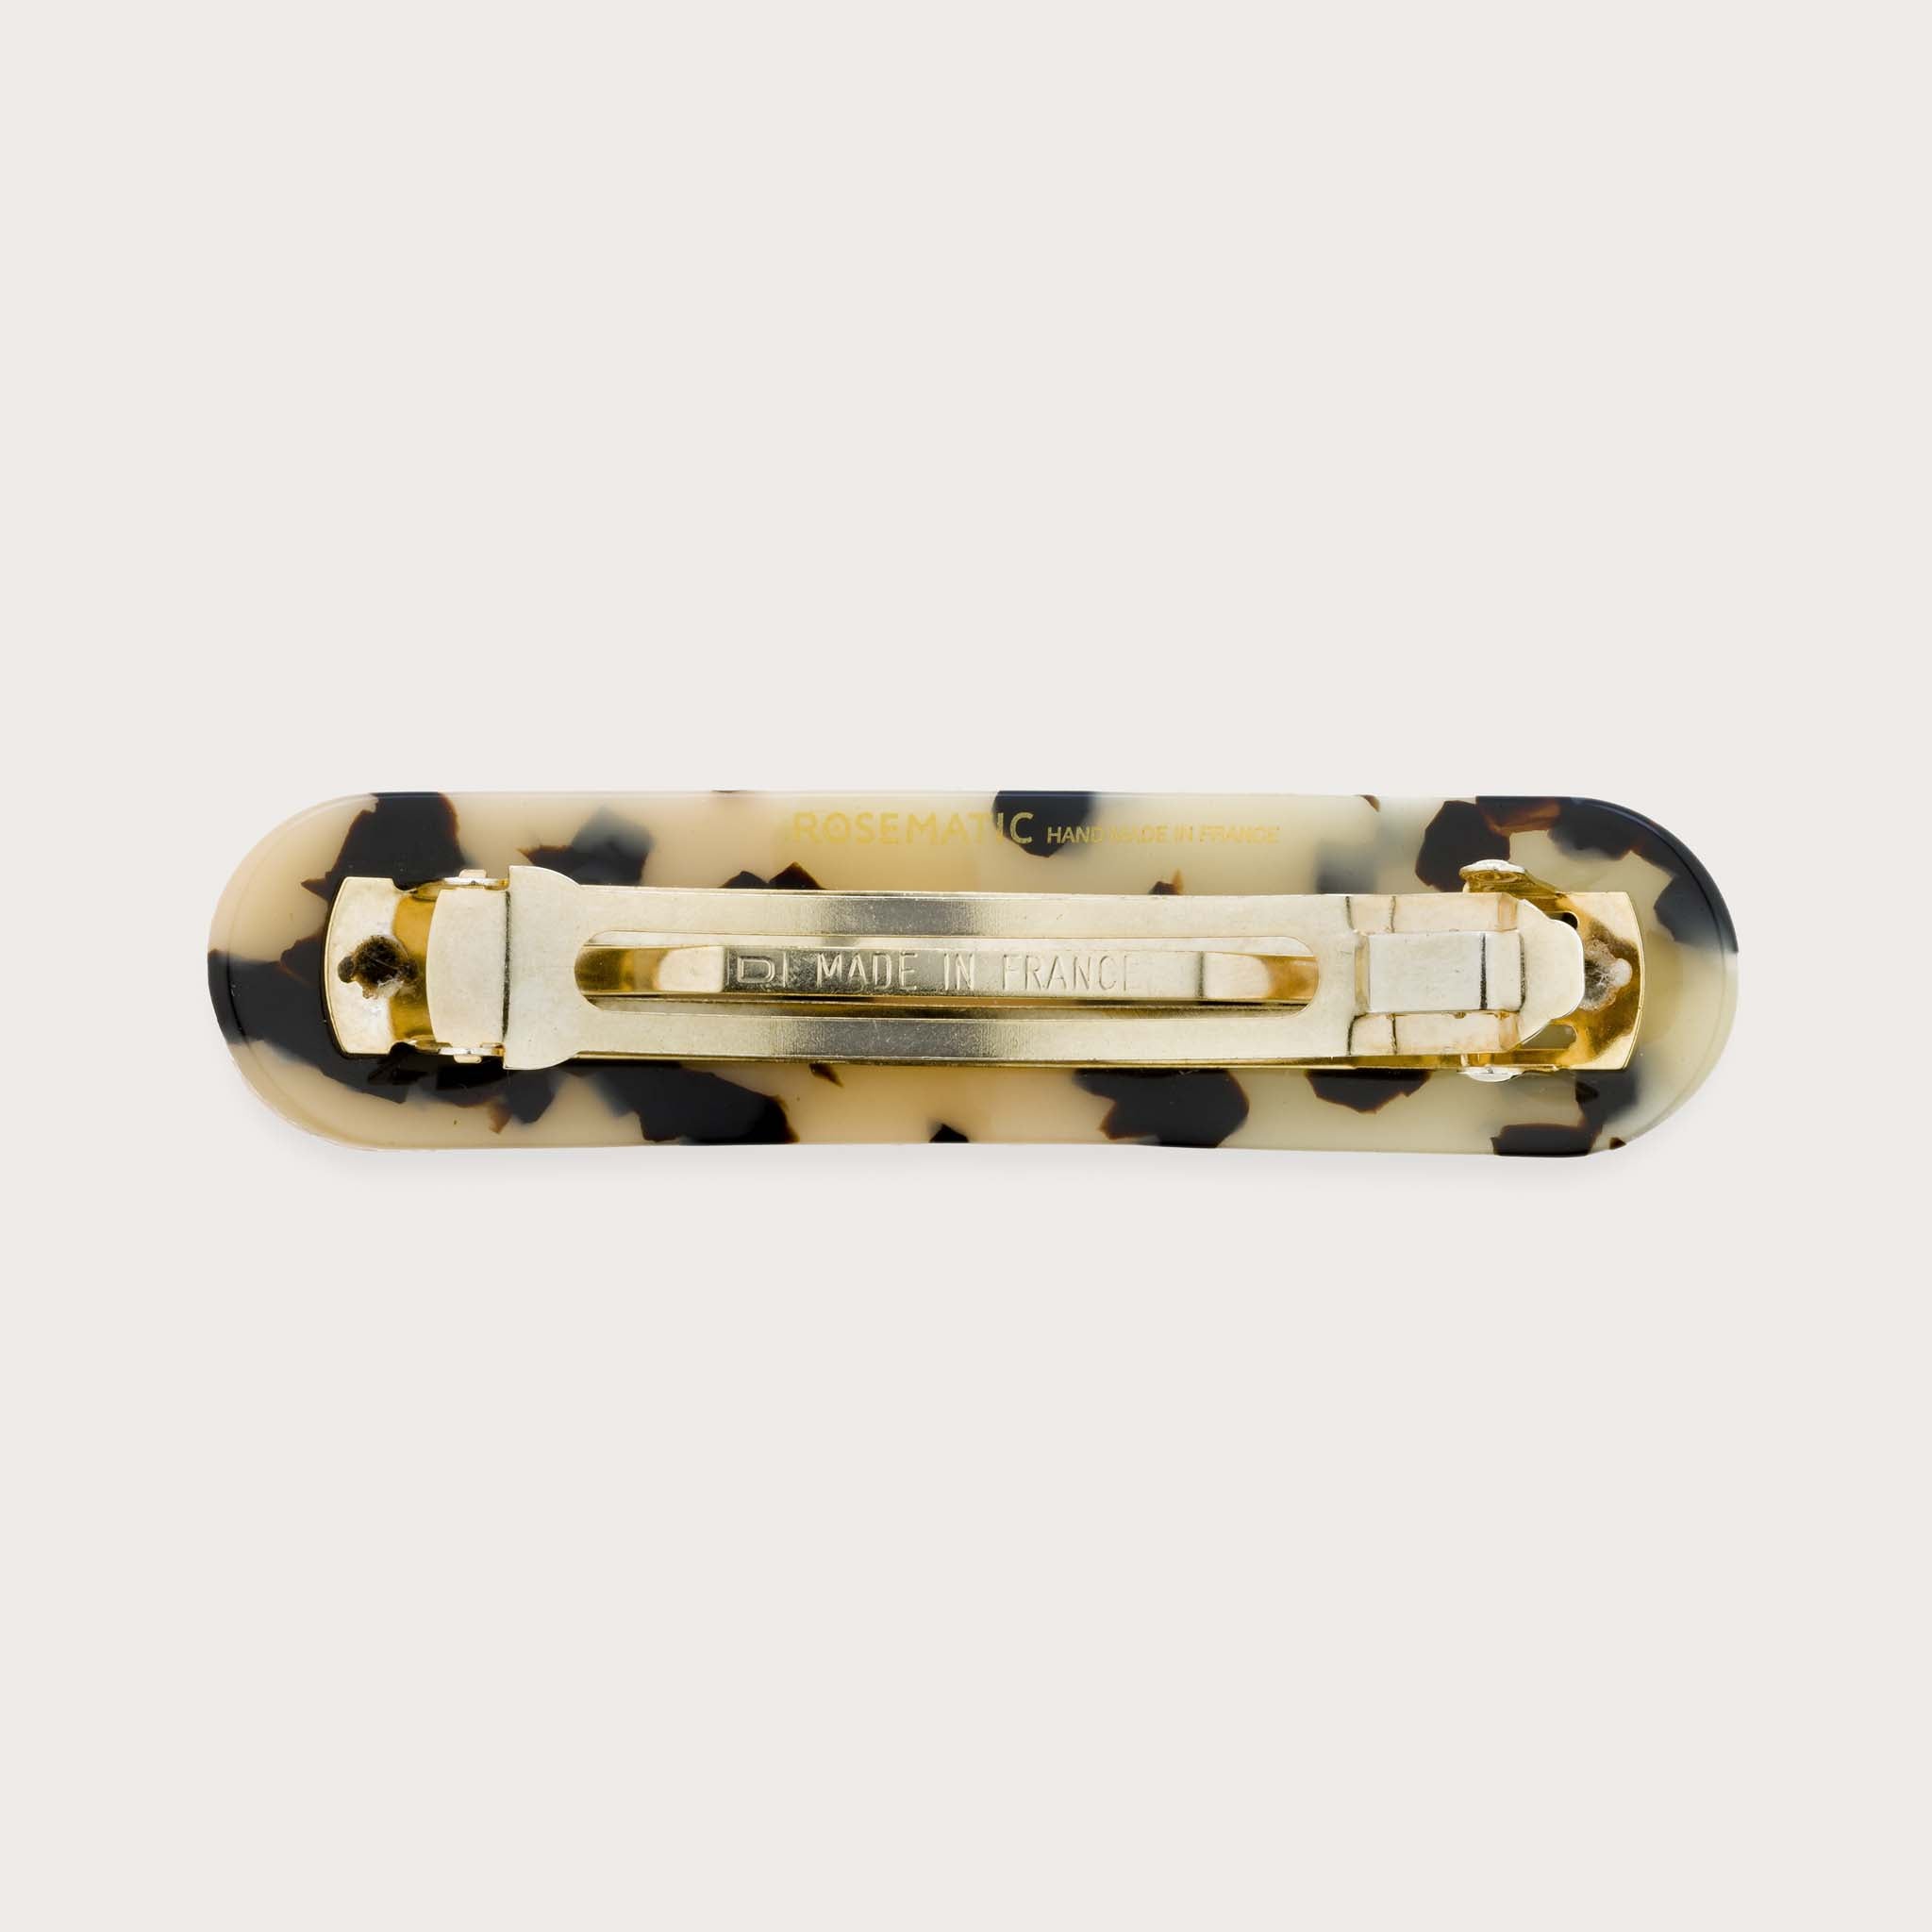 GRAPHIC - Large C1 acetate hairclip